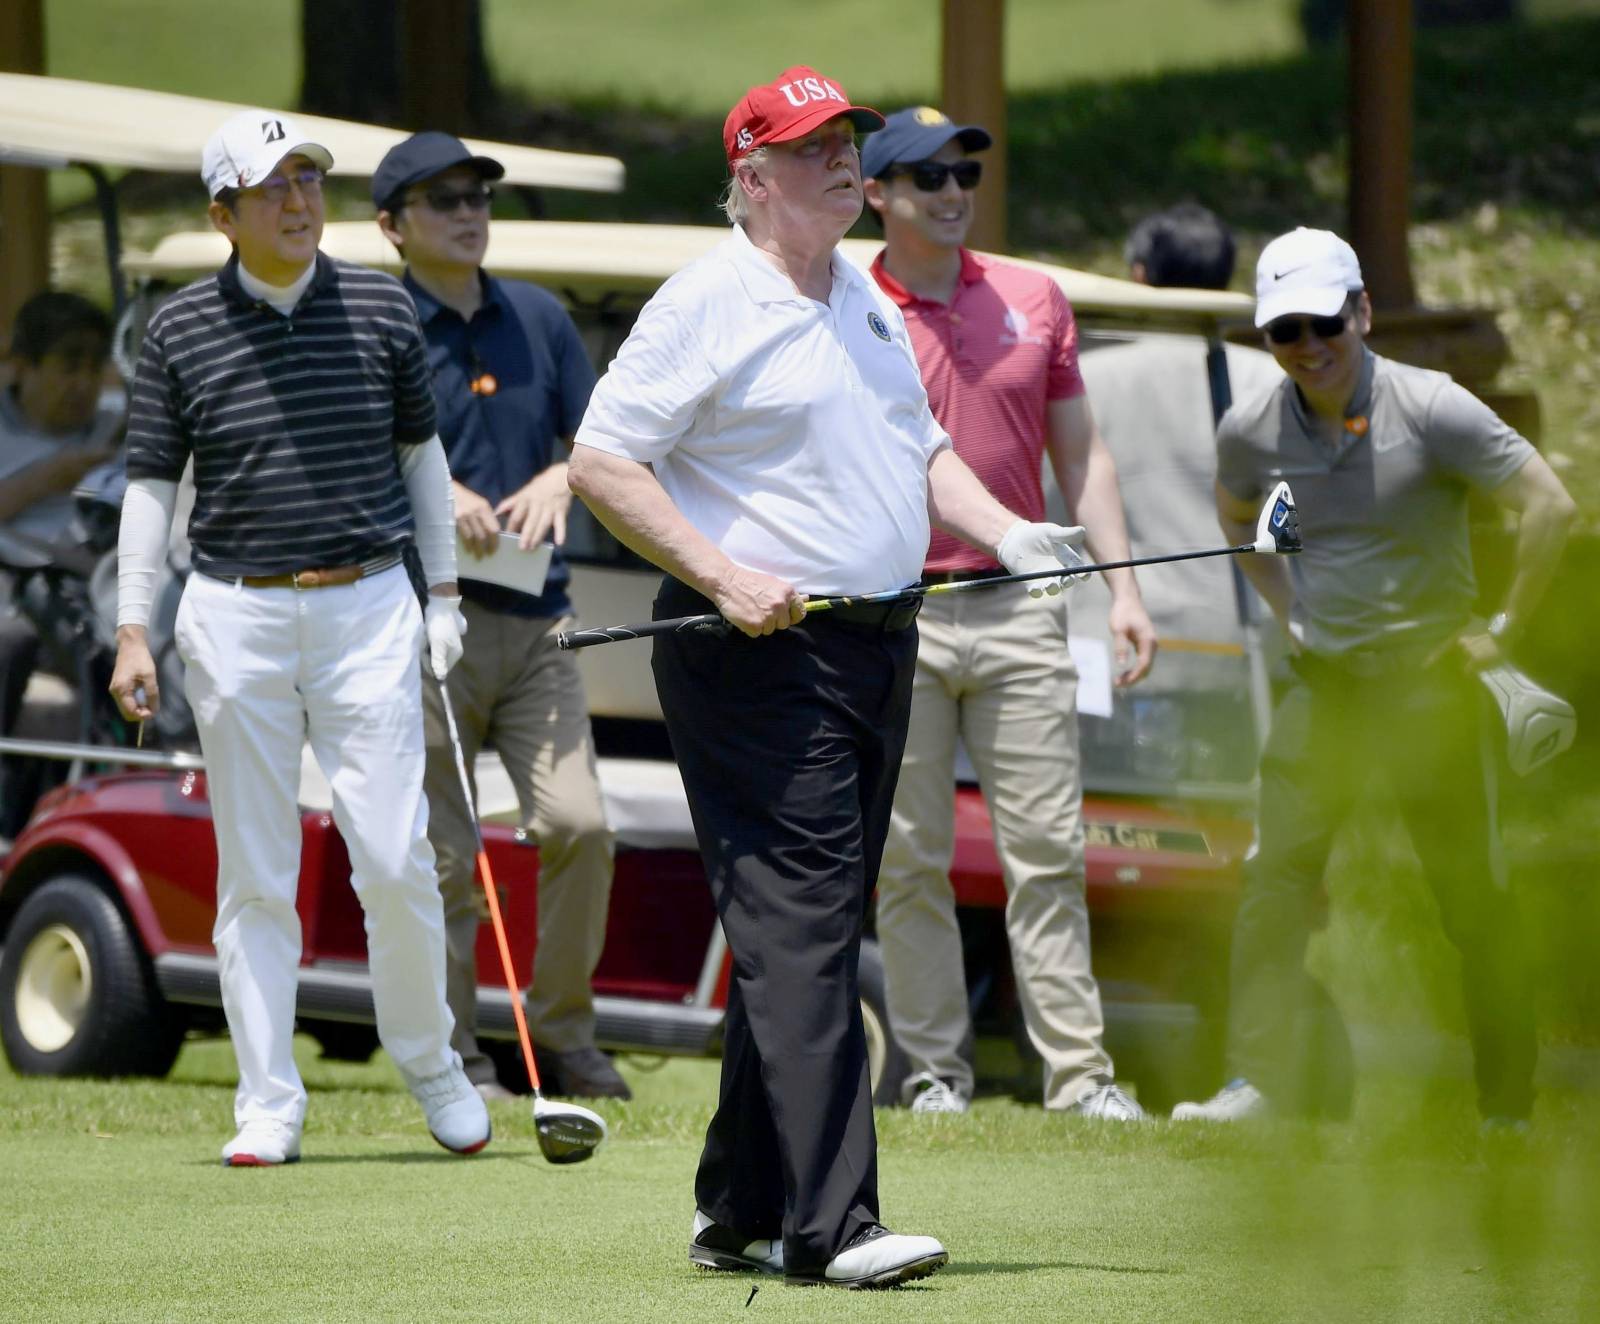 U.S. President Donald Trump and Japan's Prime Minister Shinzo Abe play golf at Mobara Country Club in Mobara, Chiba prefecture, Japan